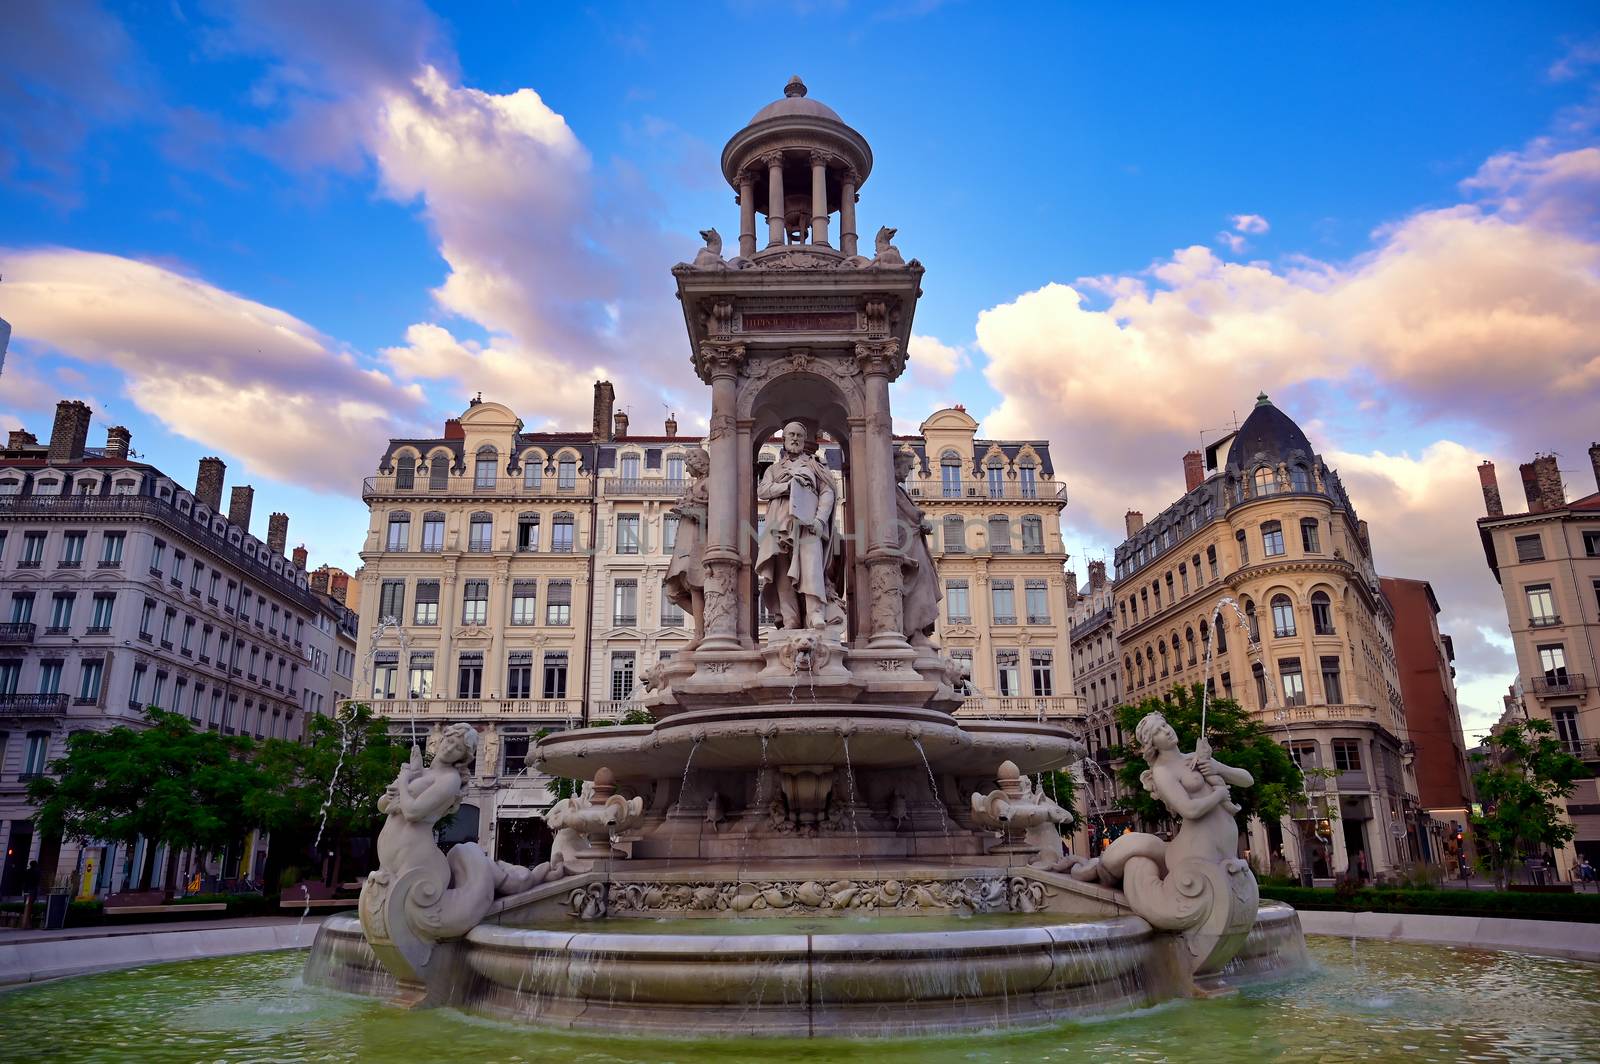 The fountain on Place des Jacobins in the heart of Lyon, France.